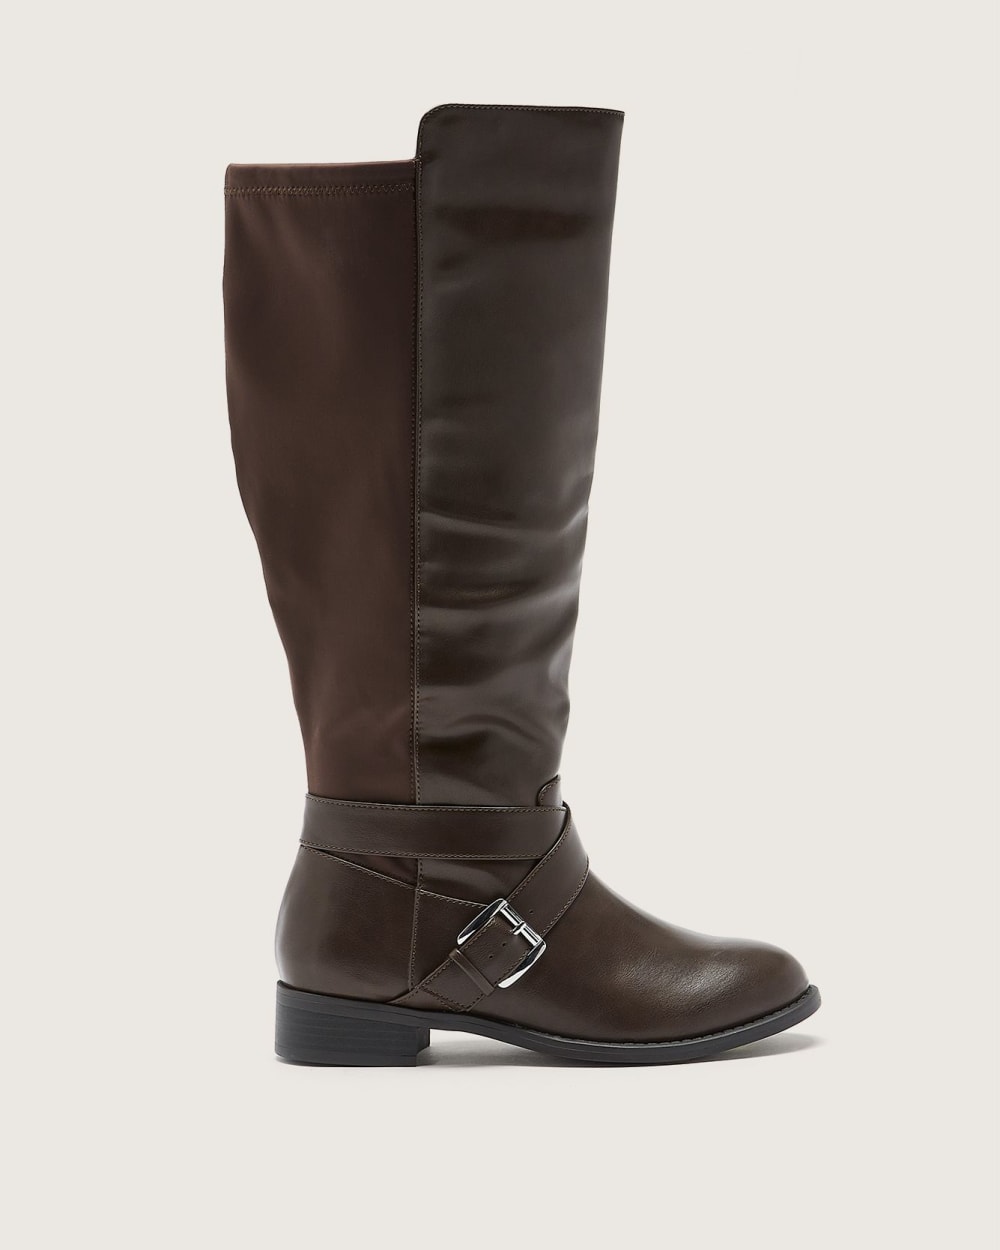 Extra Wide Width, Tall Boot with Ankle Strap | Penningtons